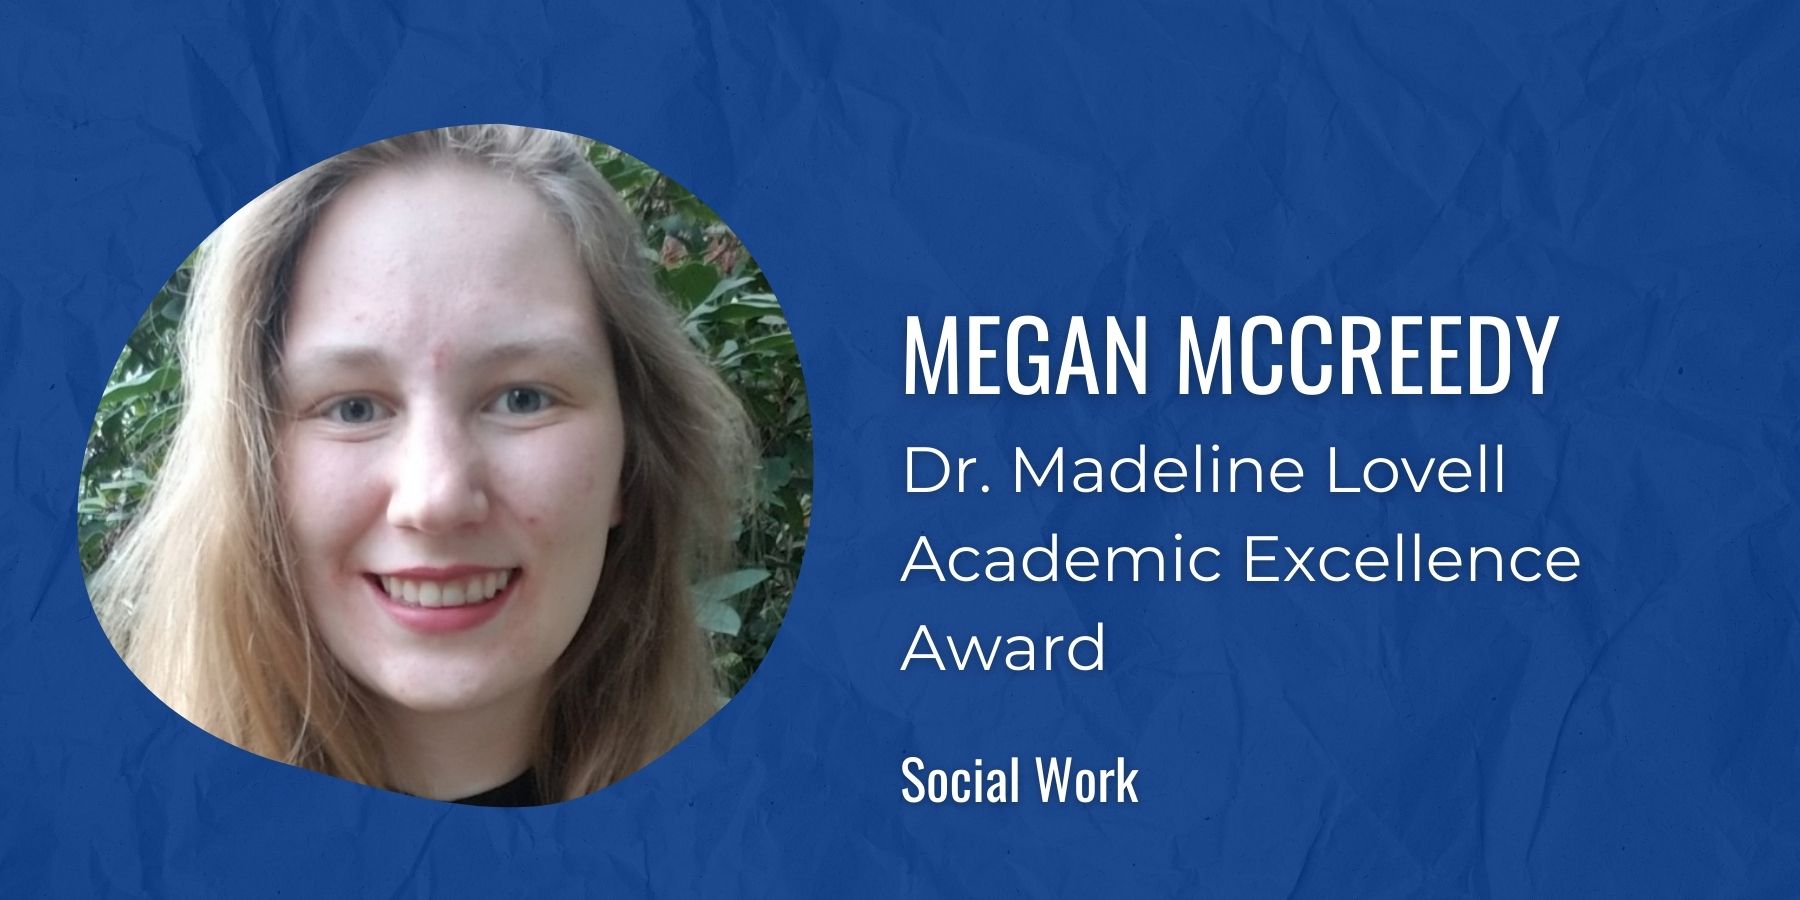 Image of Megan McCreedy with text: Dr. Madeline Lovell Academic Excellence Award, Social Work
